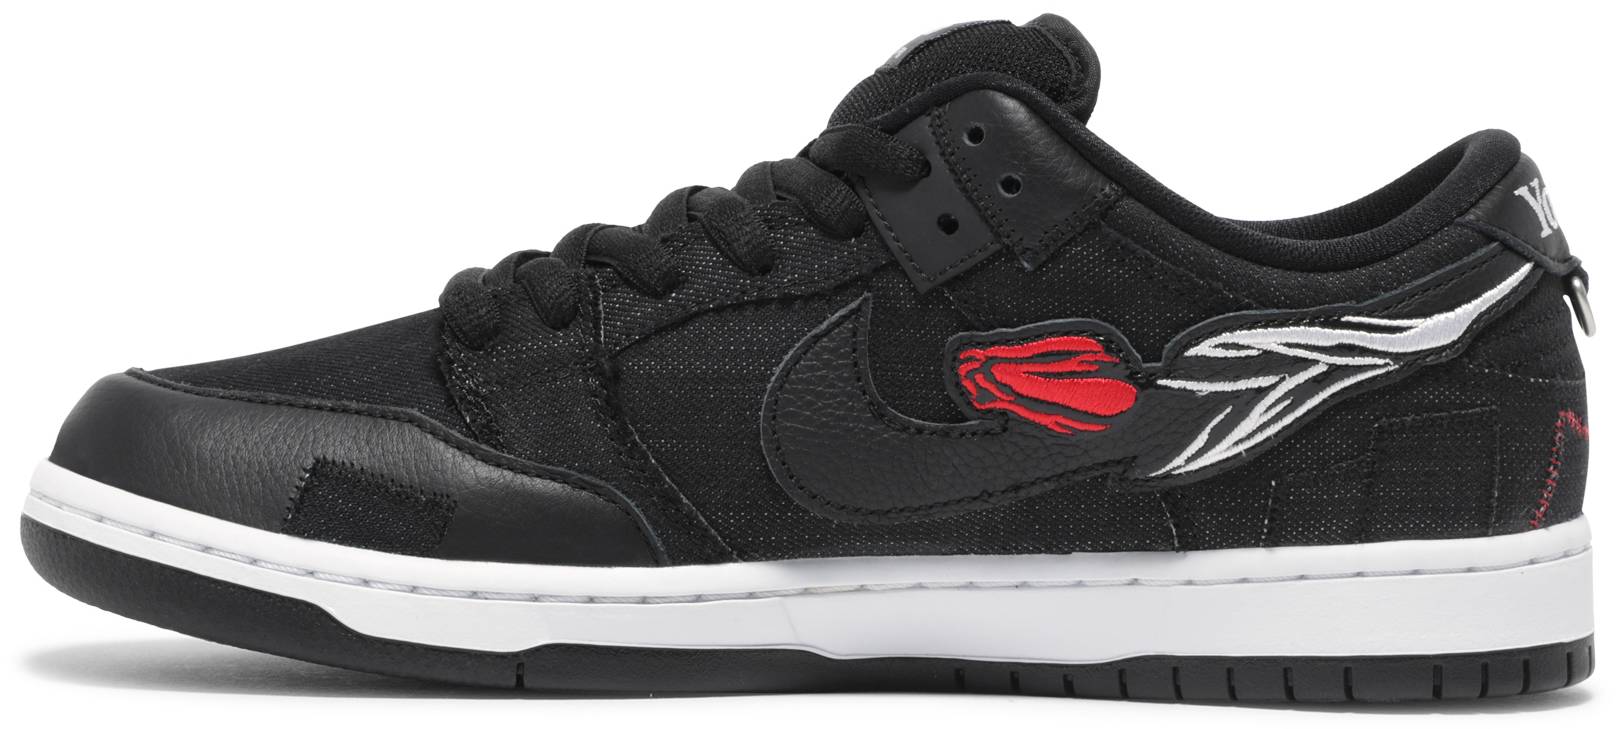 Nike SB Dunk Low Wasted Youth Men's